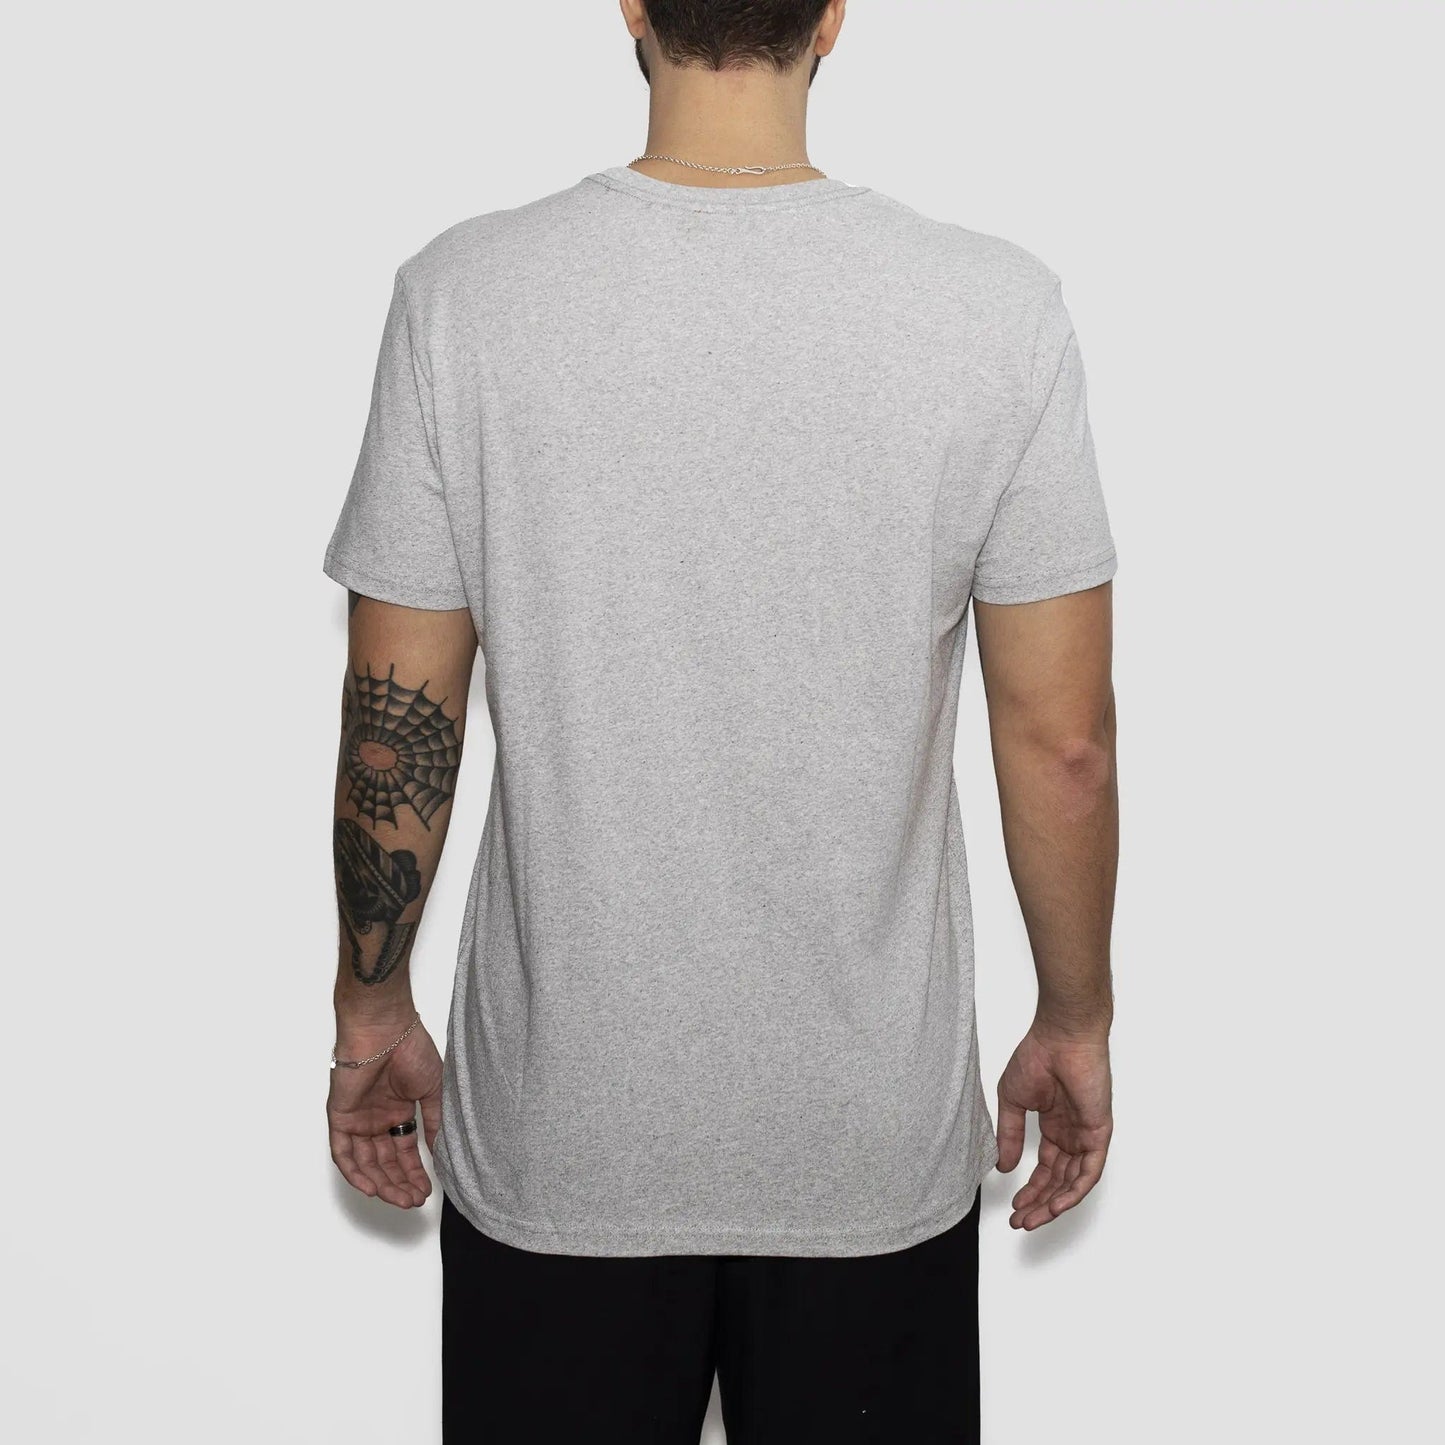 Men’s Recycled Cotton T-Shirt, Heather Grey